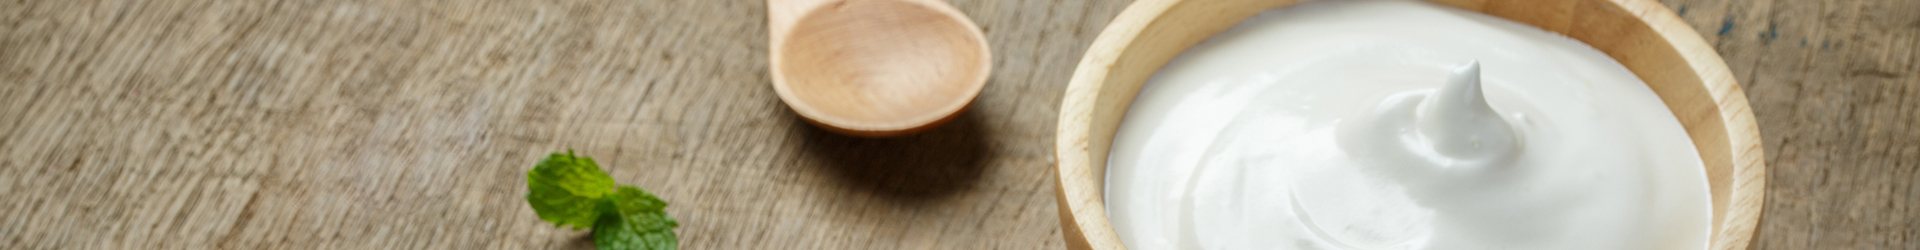 Wooden Bowls & Serving Dishes